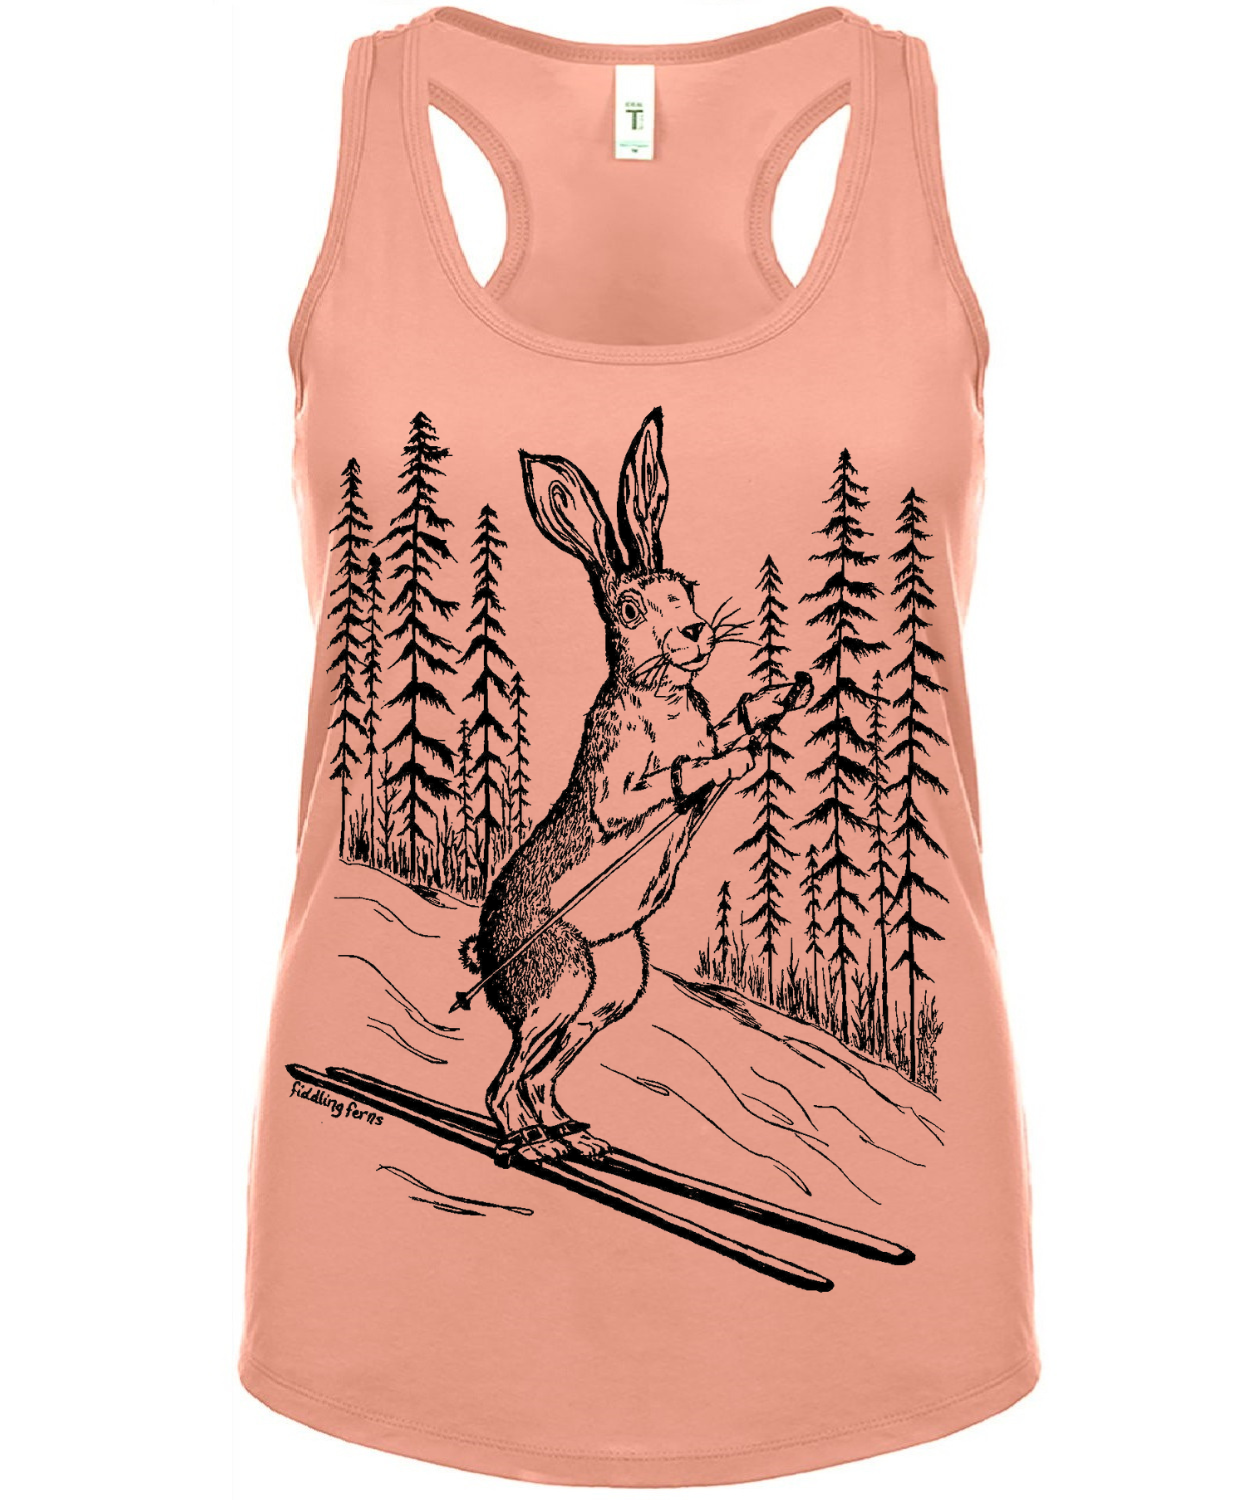 The Bunny Hill Ladies Tank Top